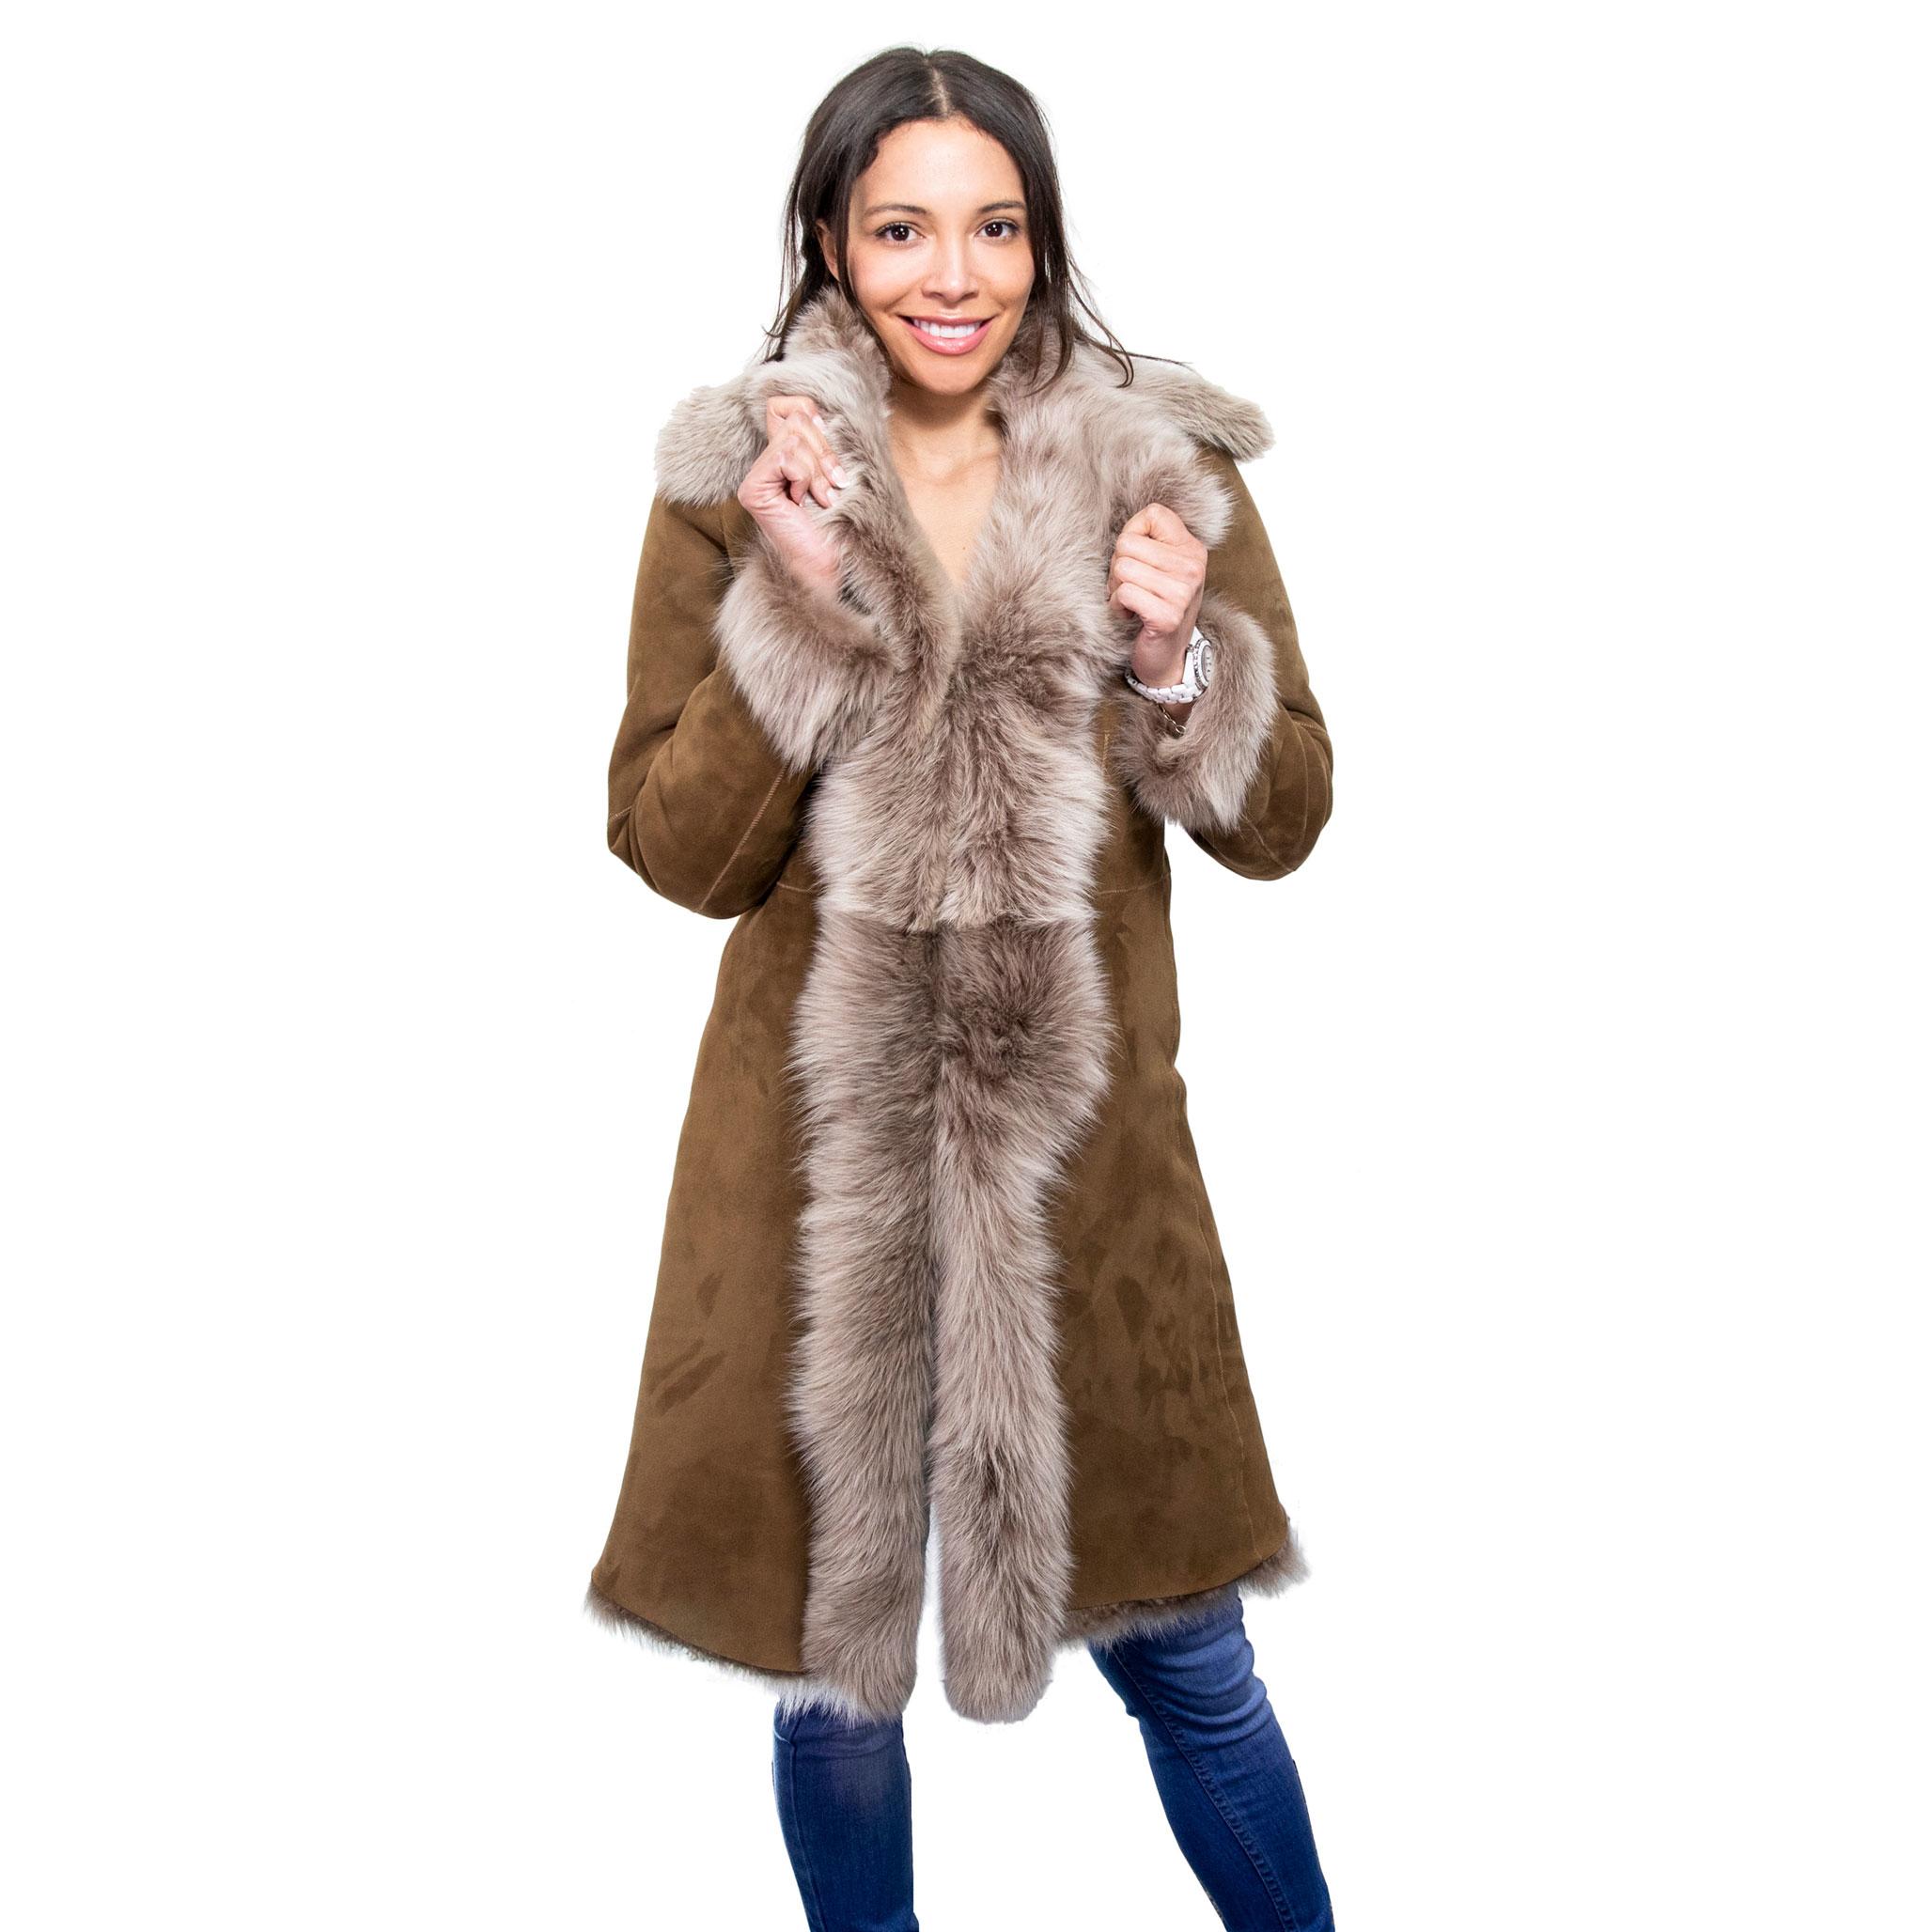 The female model feels the toscana fur, which drapes her long, tan sheepskin coat. The toscana fur colour appears grey, tan.